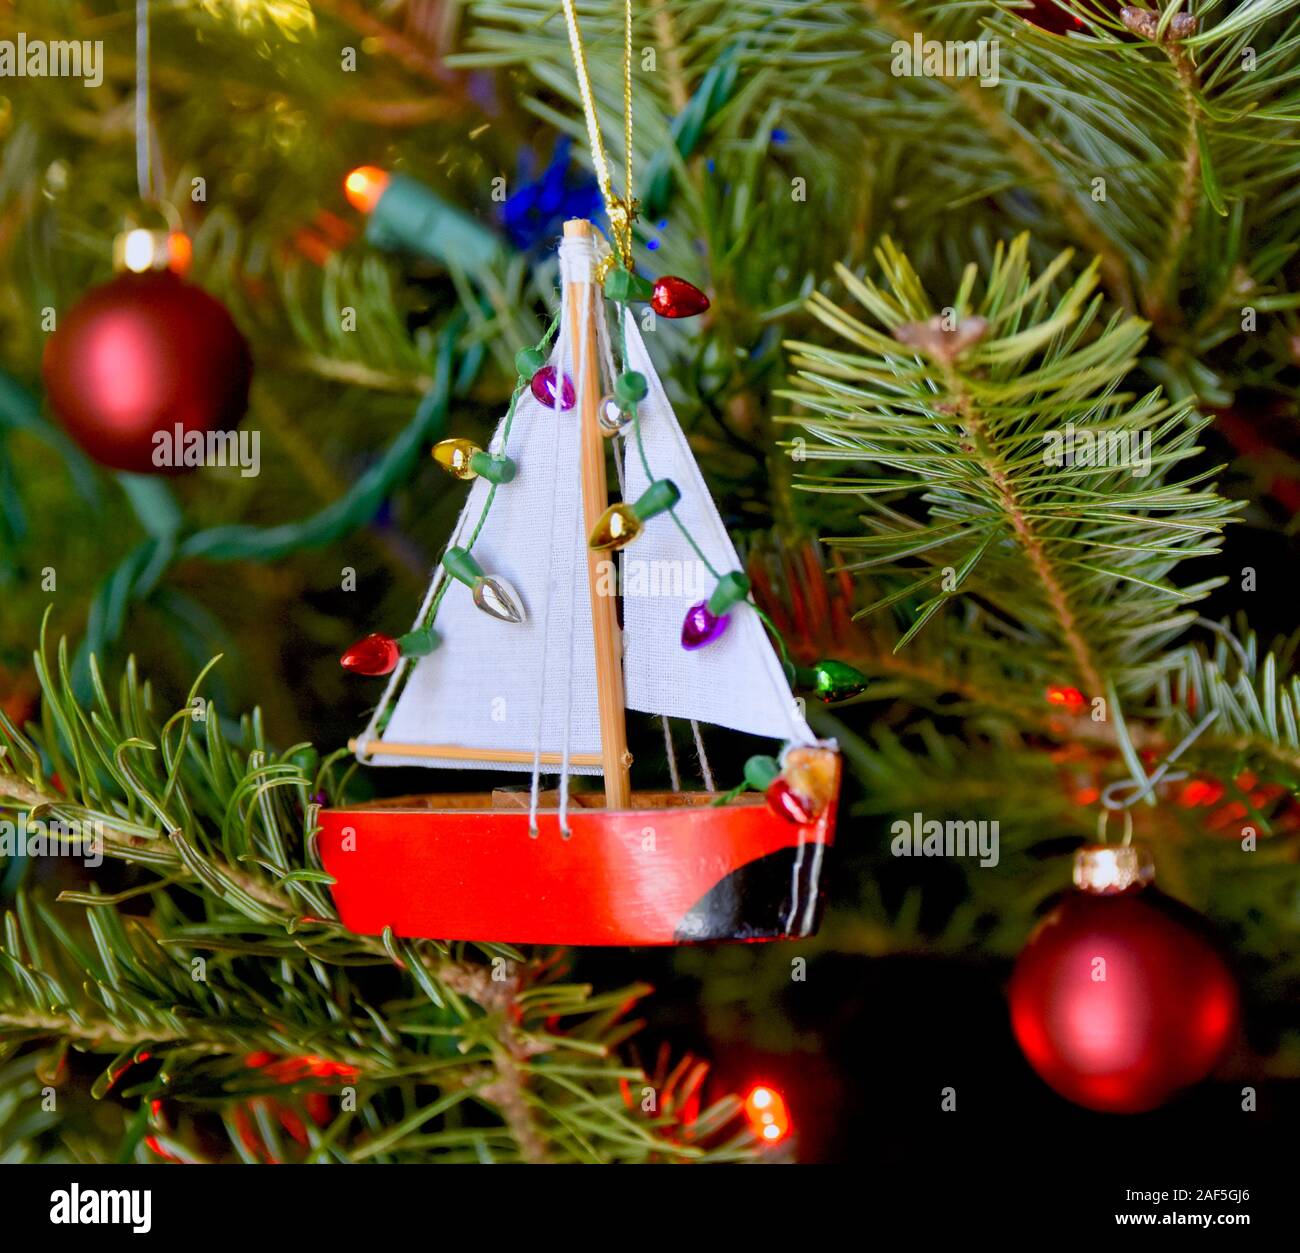 Little red sailboat ornament hanging on a Christmas tree. Closeup. Stock Photo